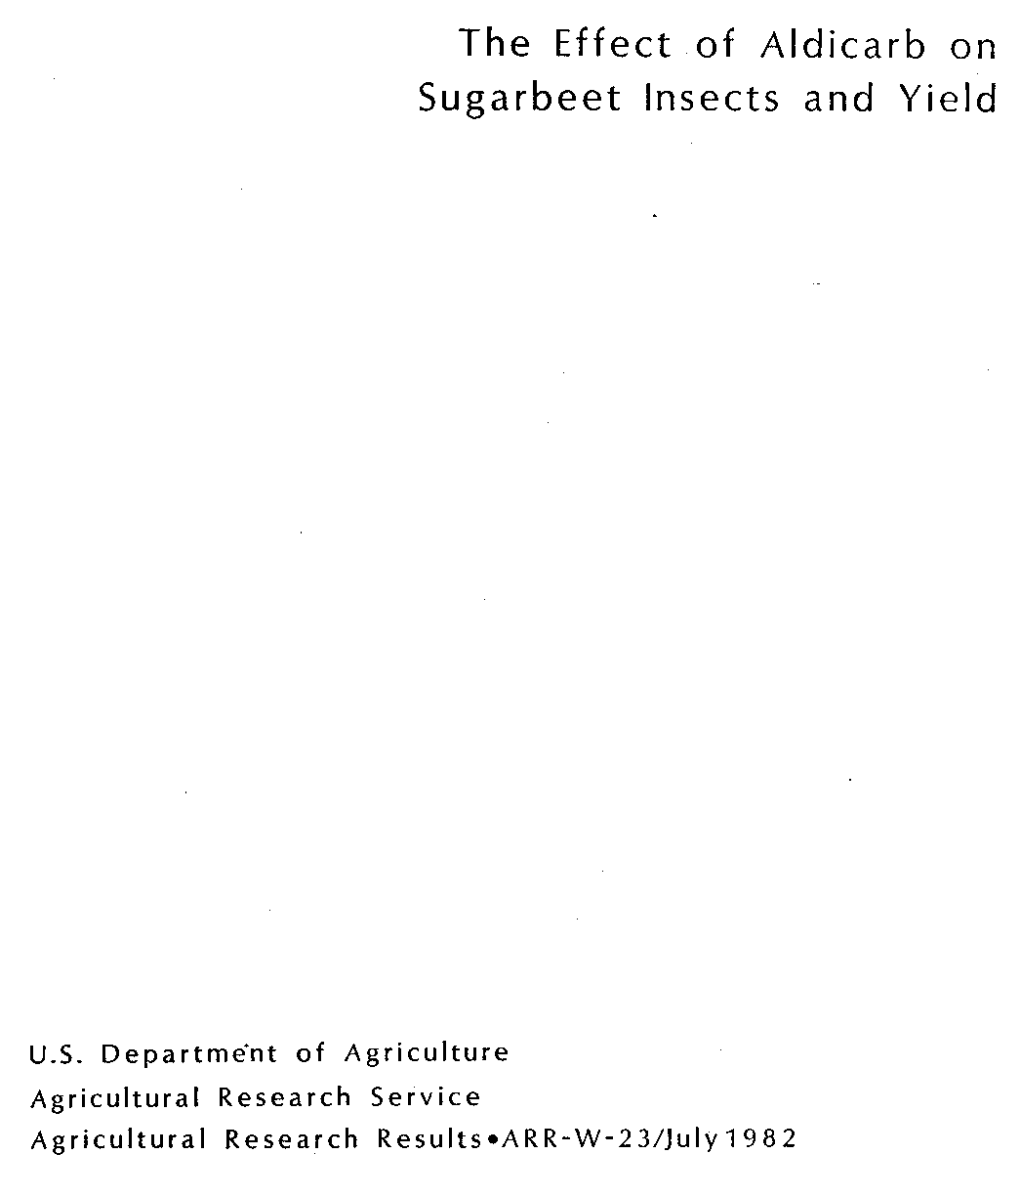 The Effect of Aldicarb on Sugarbeet Insects and Yield